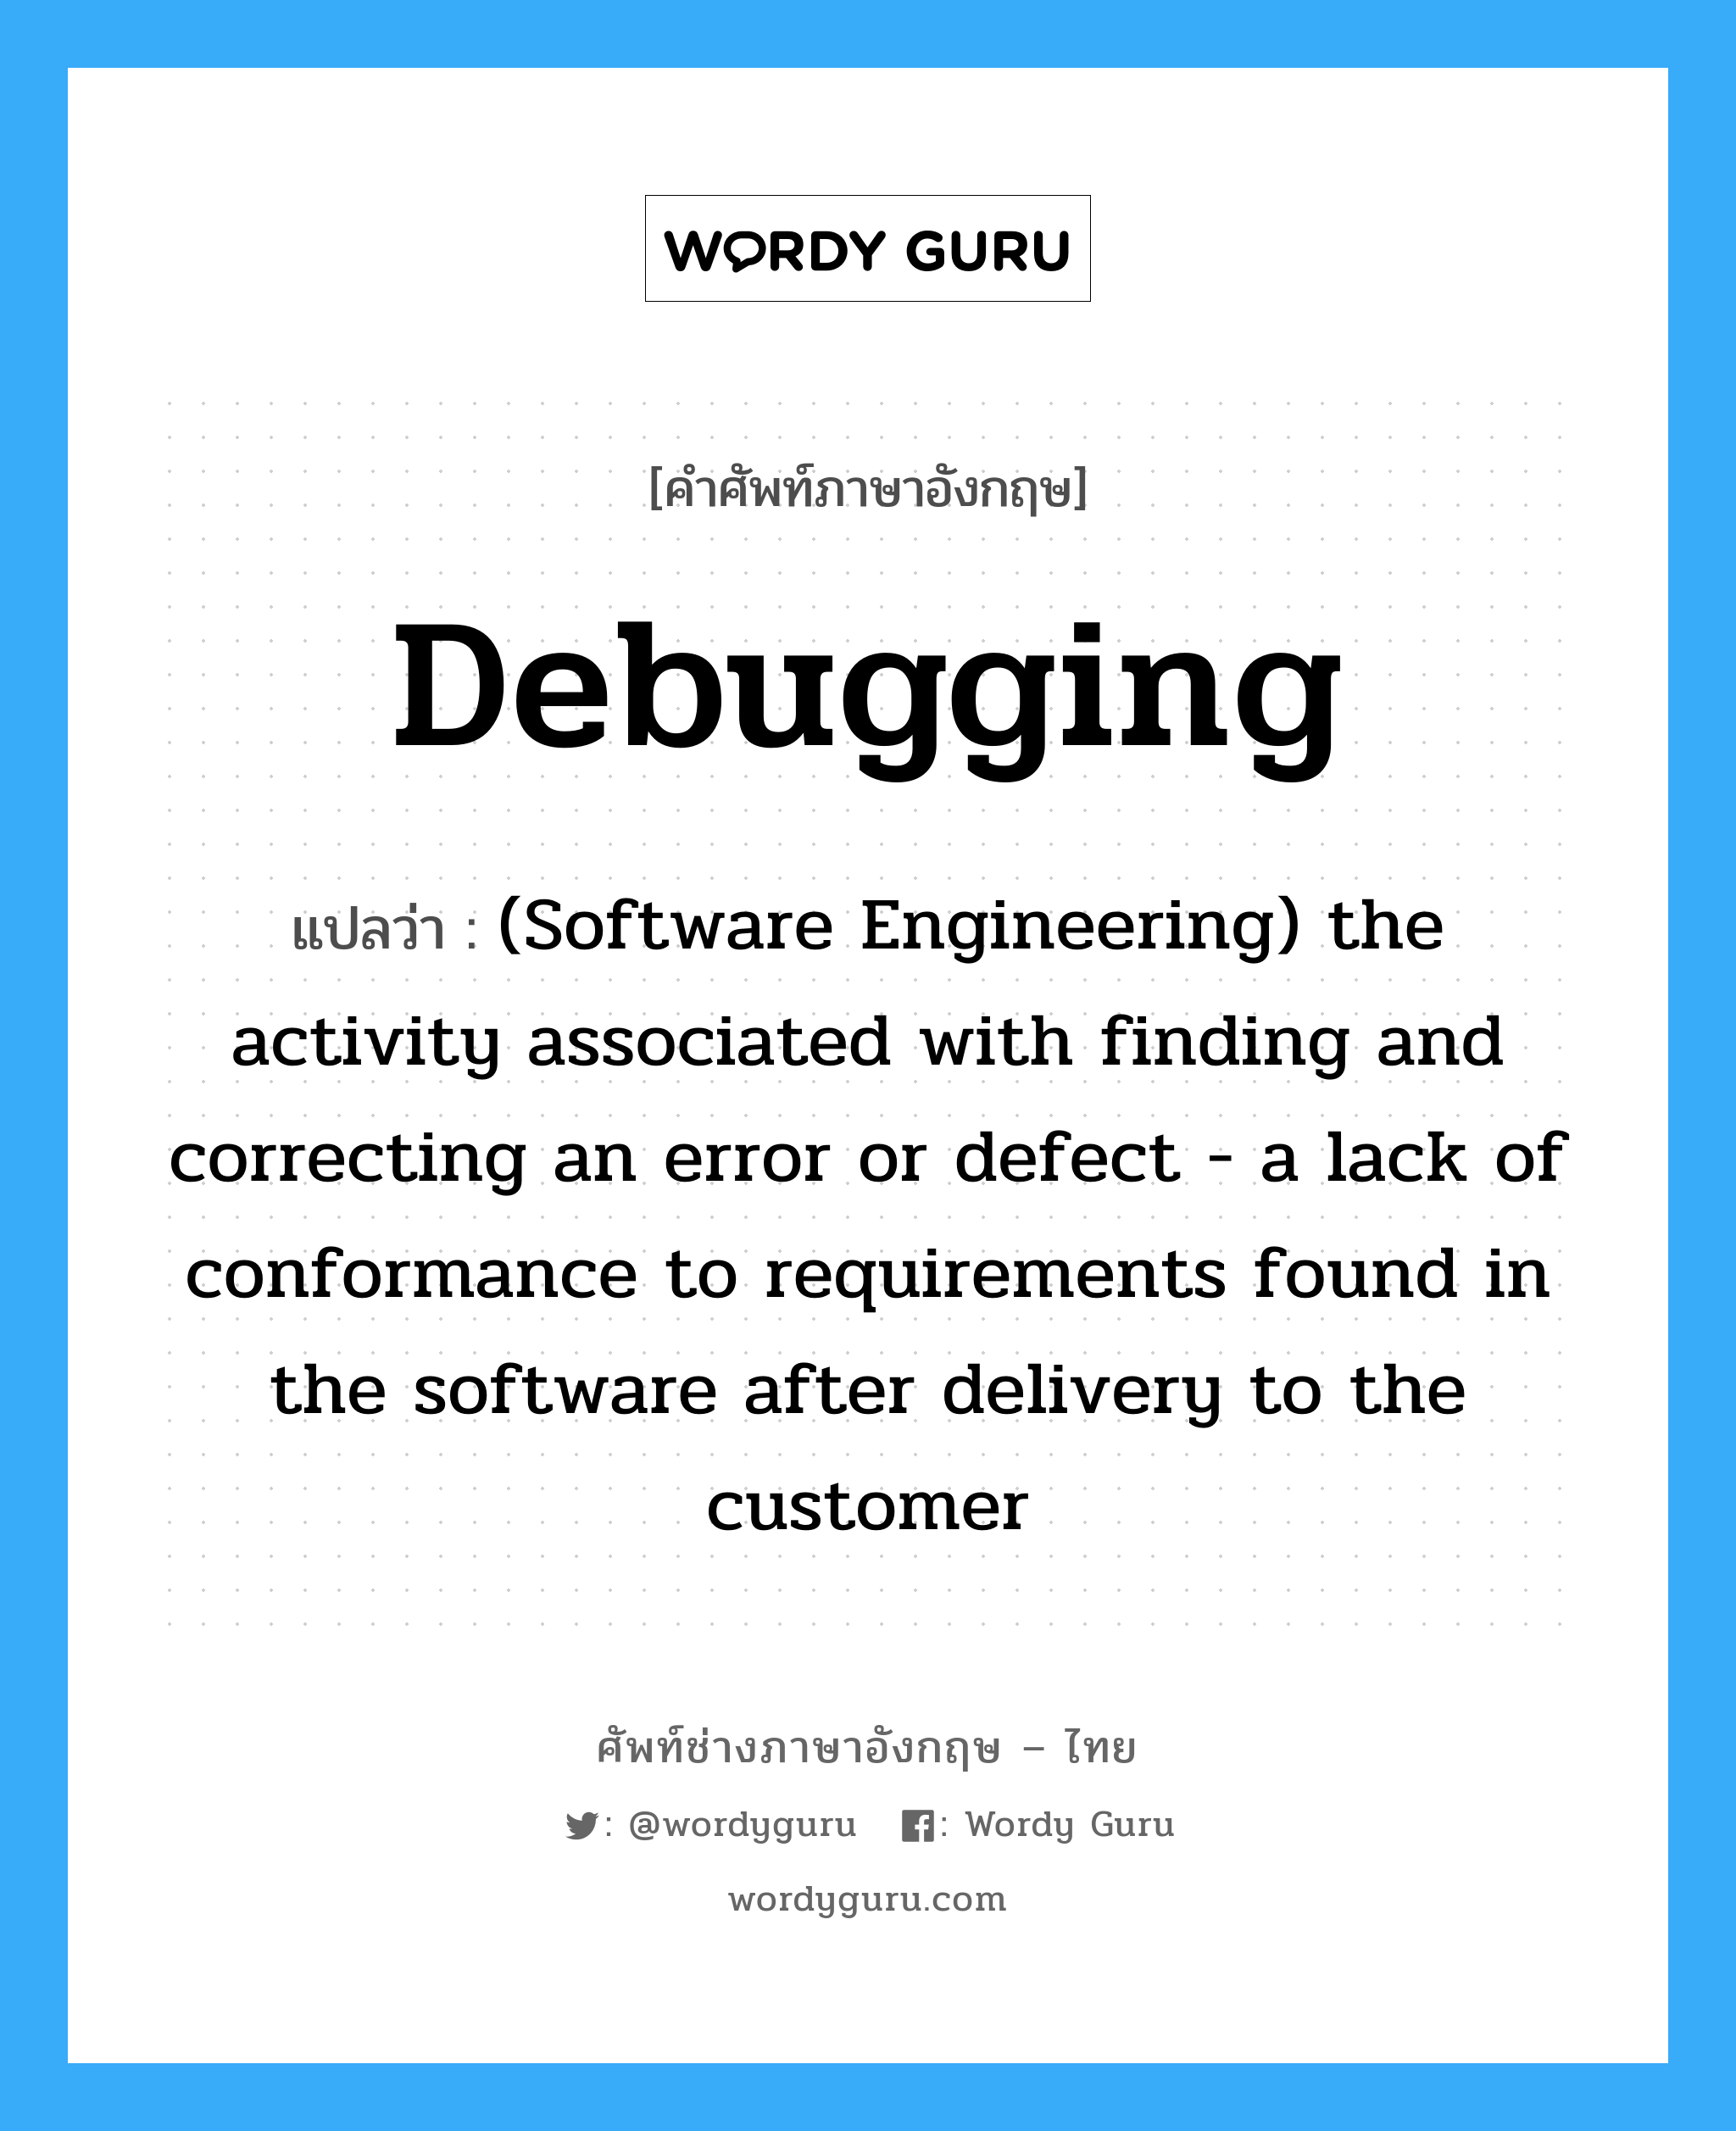 Debugging แปลว่า?, คำศัพท์ช่างภาษาอังกฤษ - ไทย Debugging คำศัพท์ภาษาอังกฤษ Debugging แปลว่า (Software Engineering) the activity associated with finding and correcting an error or defect - a lack of conformance to requirements found in the software after delivery to the customer